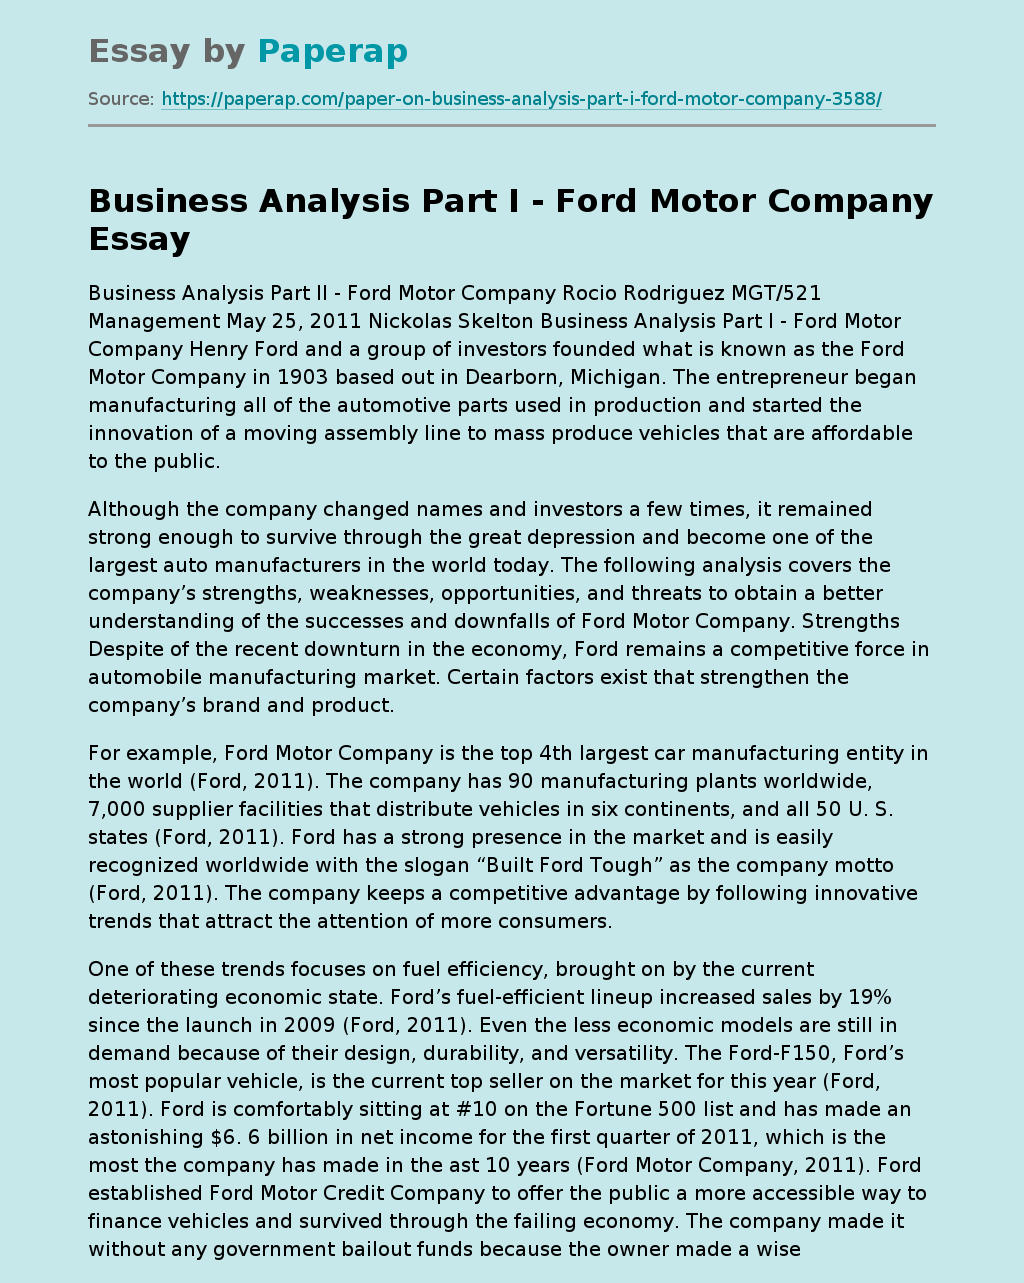 Business Analysis Part I - Ford Motor Company